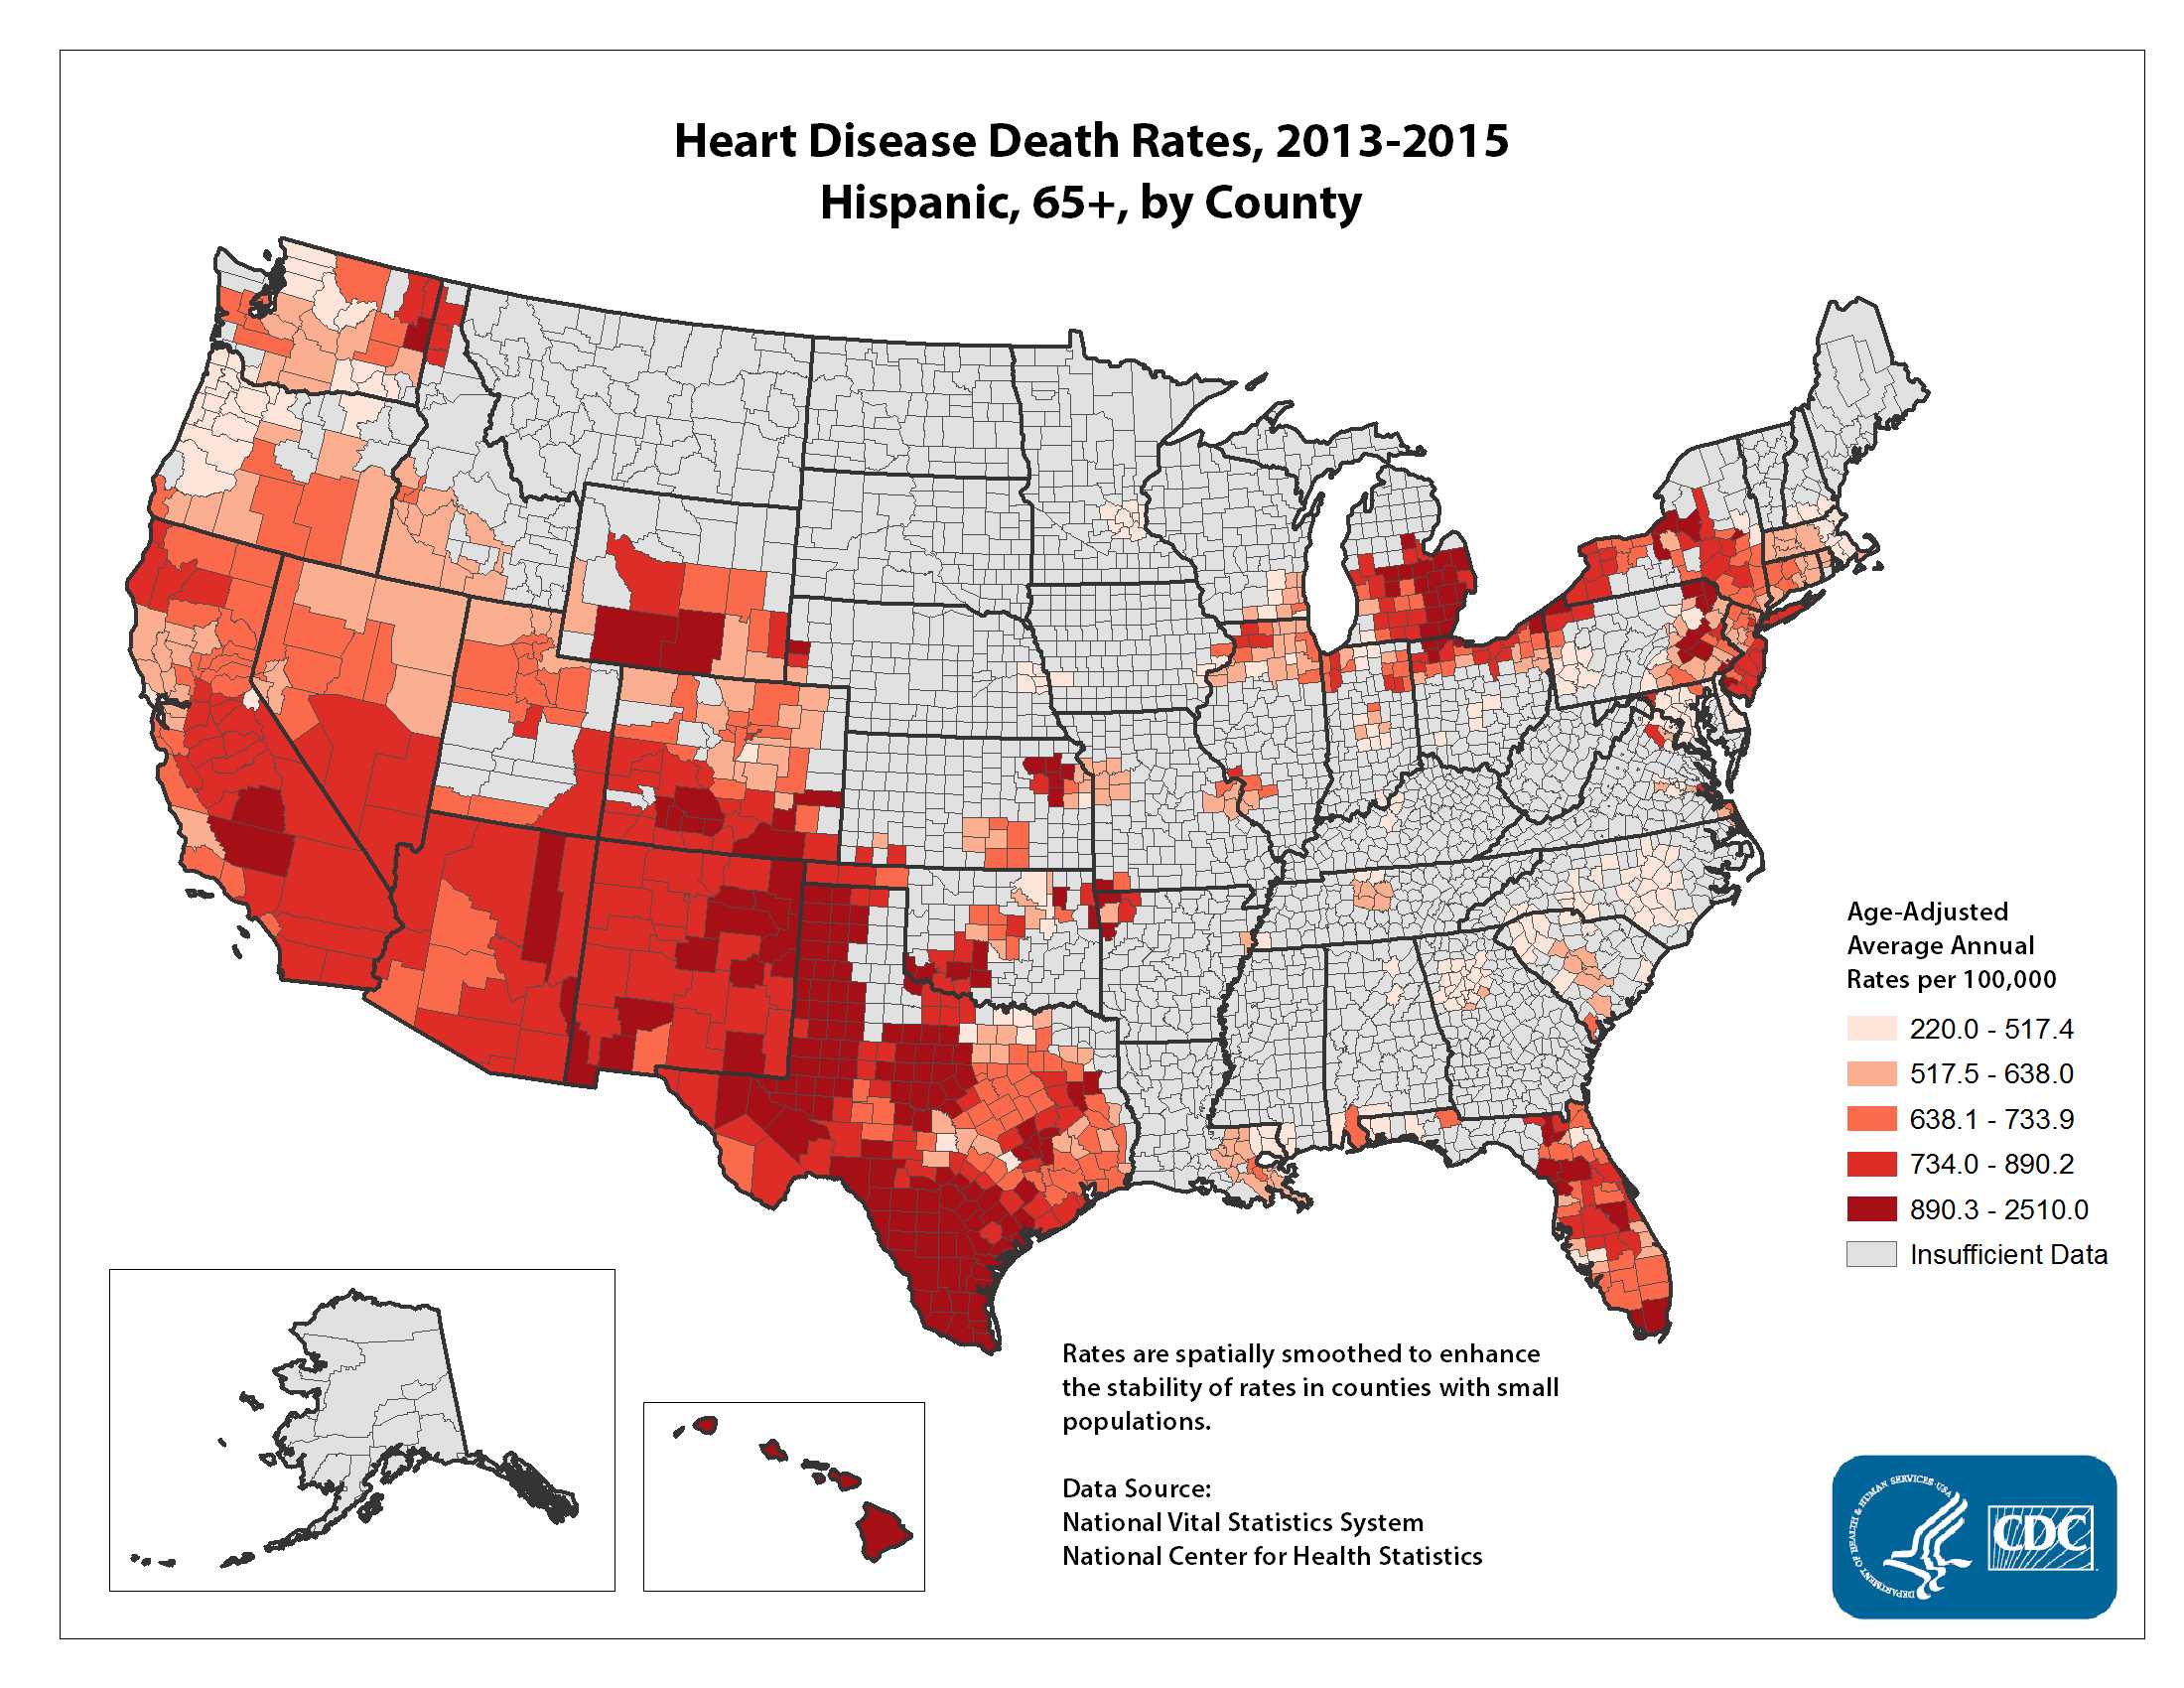 Heart Disease Death Rates for 2012 through 2014 for Hispanics Aged 65 Years and Older by County. The map shows that concentrations of counties with the highest heart disease death rates - meaning the top quintile - are located primarily in Hawaii, Wyoming, and Texas.  Pockets of high-rate counties also were found in parts of Michigan, Colorado, California, and New Mexico.